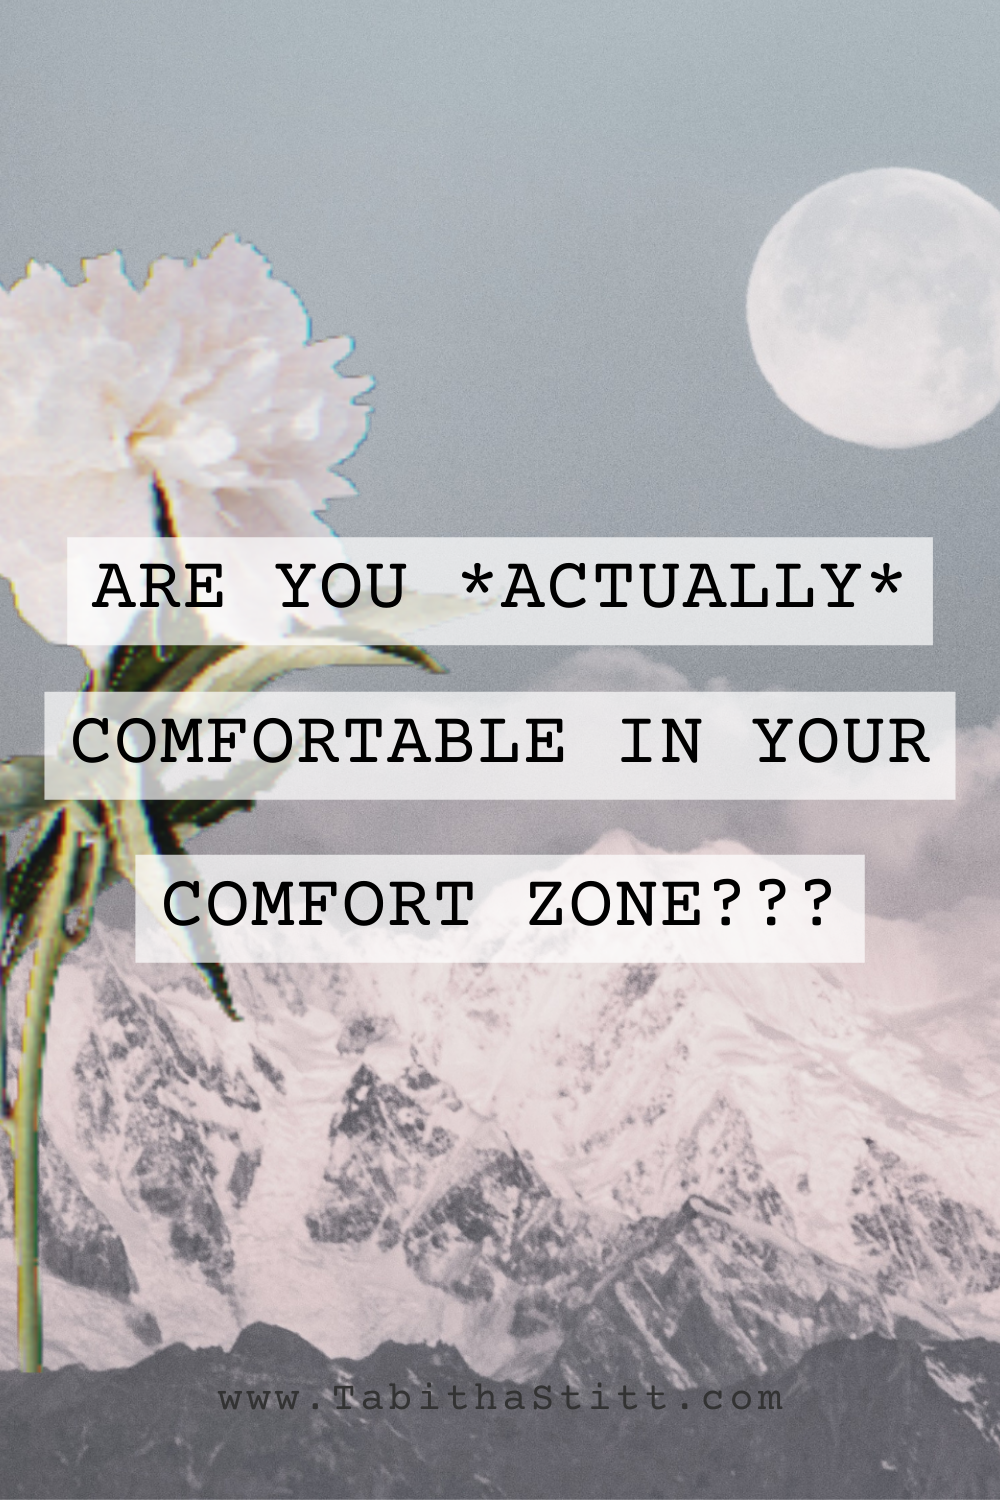 When to Listen so You Easily Find and Discover Your Calling: Are you actually comfortable in your comfort zone? From The Self-Help Psychic Podcast showing a flower for faith